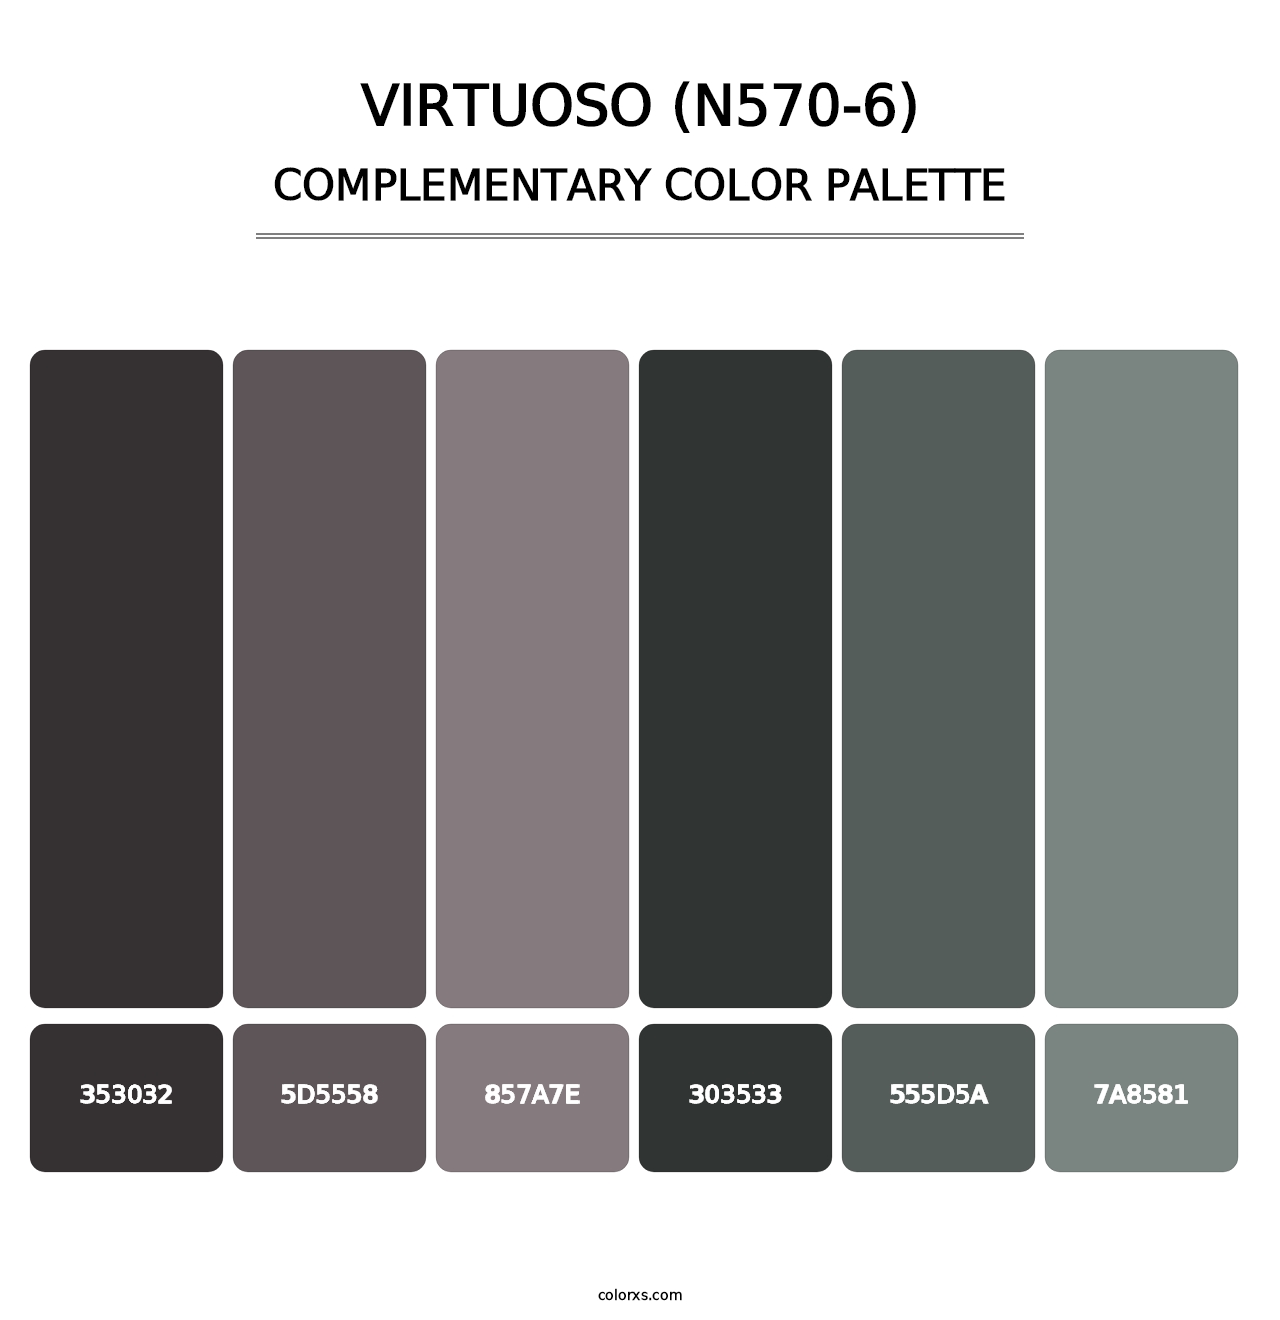 Virtuoso (N570-6) - Complementary Color Palette